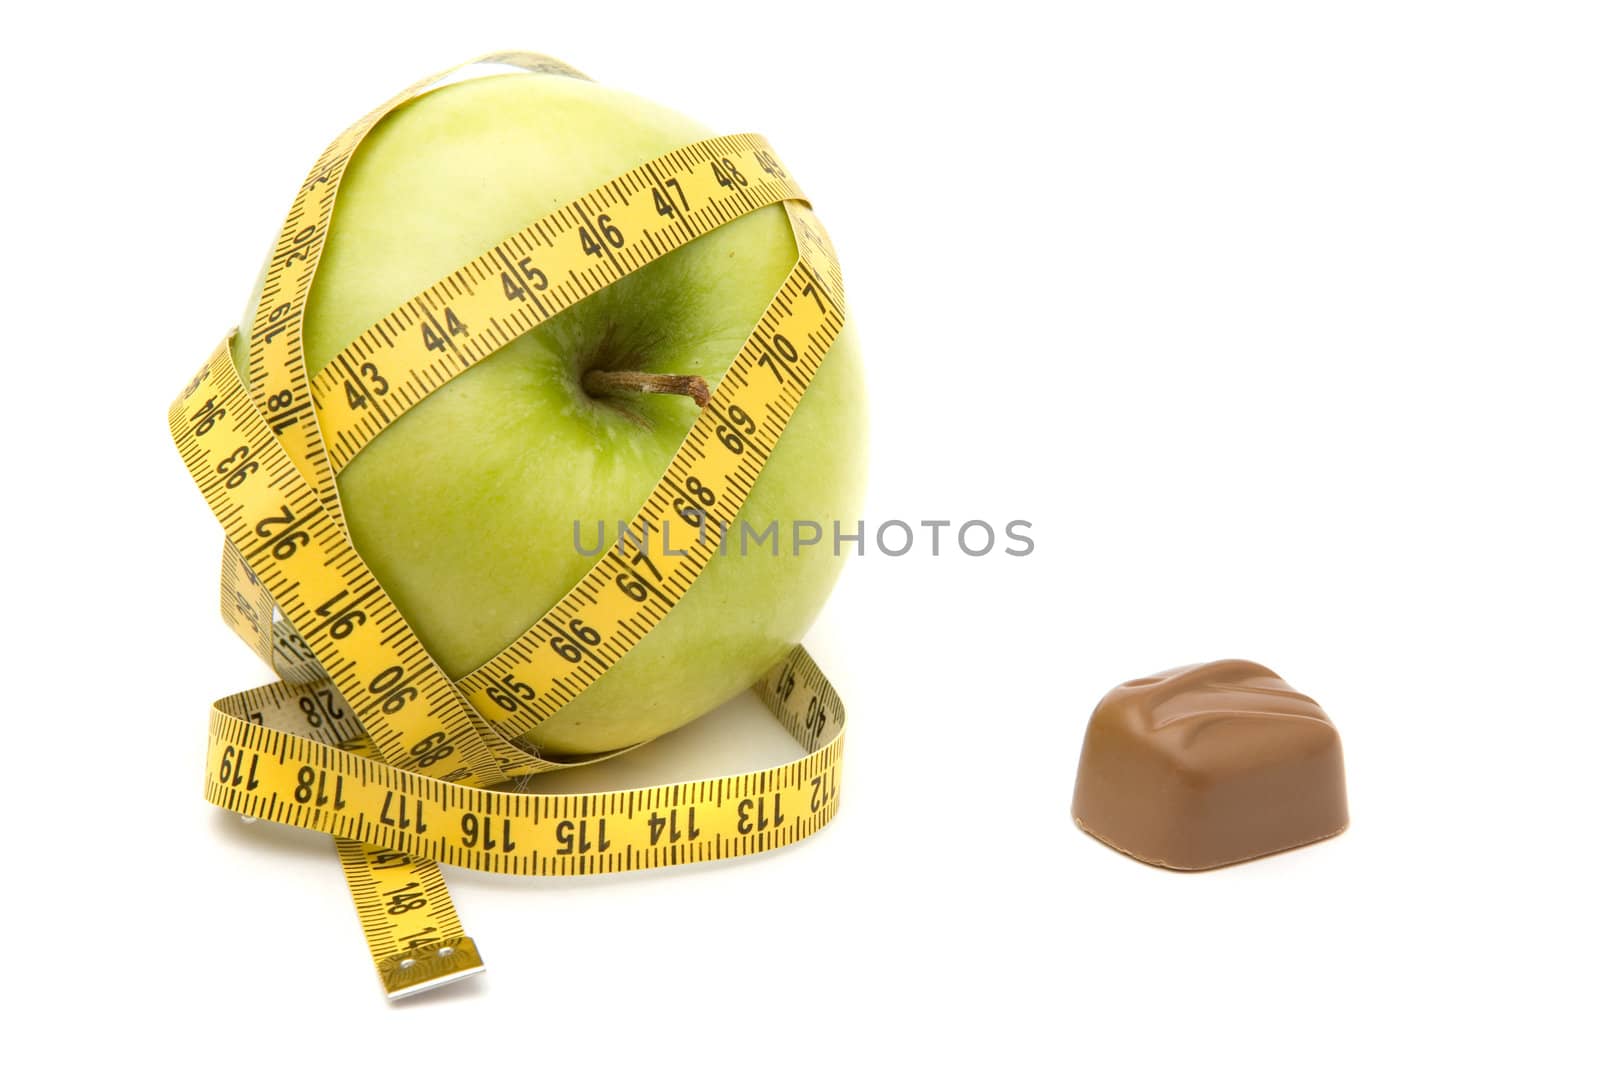 Apple imprisoned by a measuring tape versus tempting chocolate